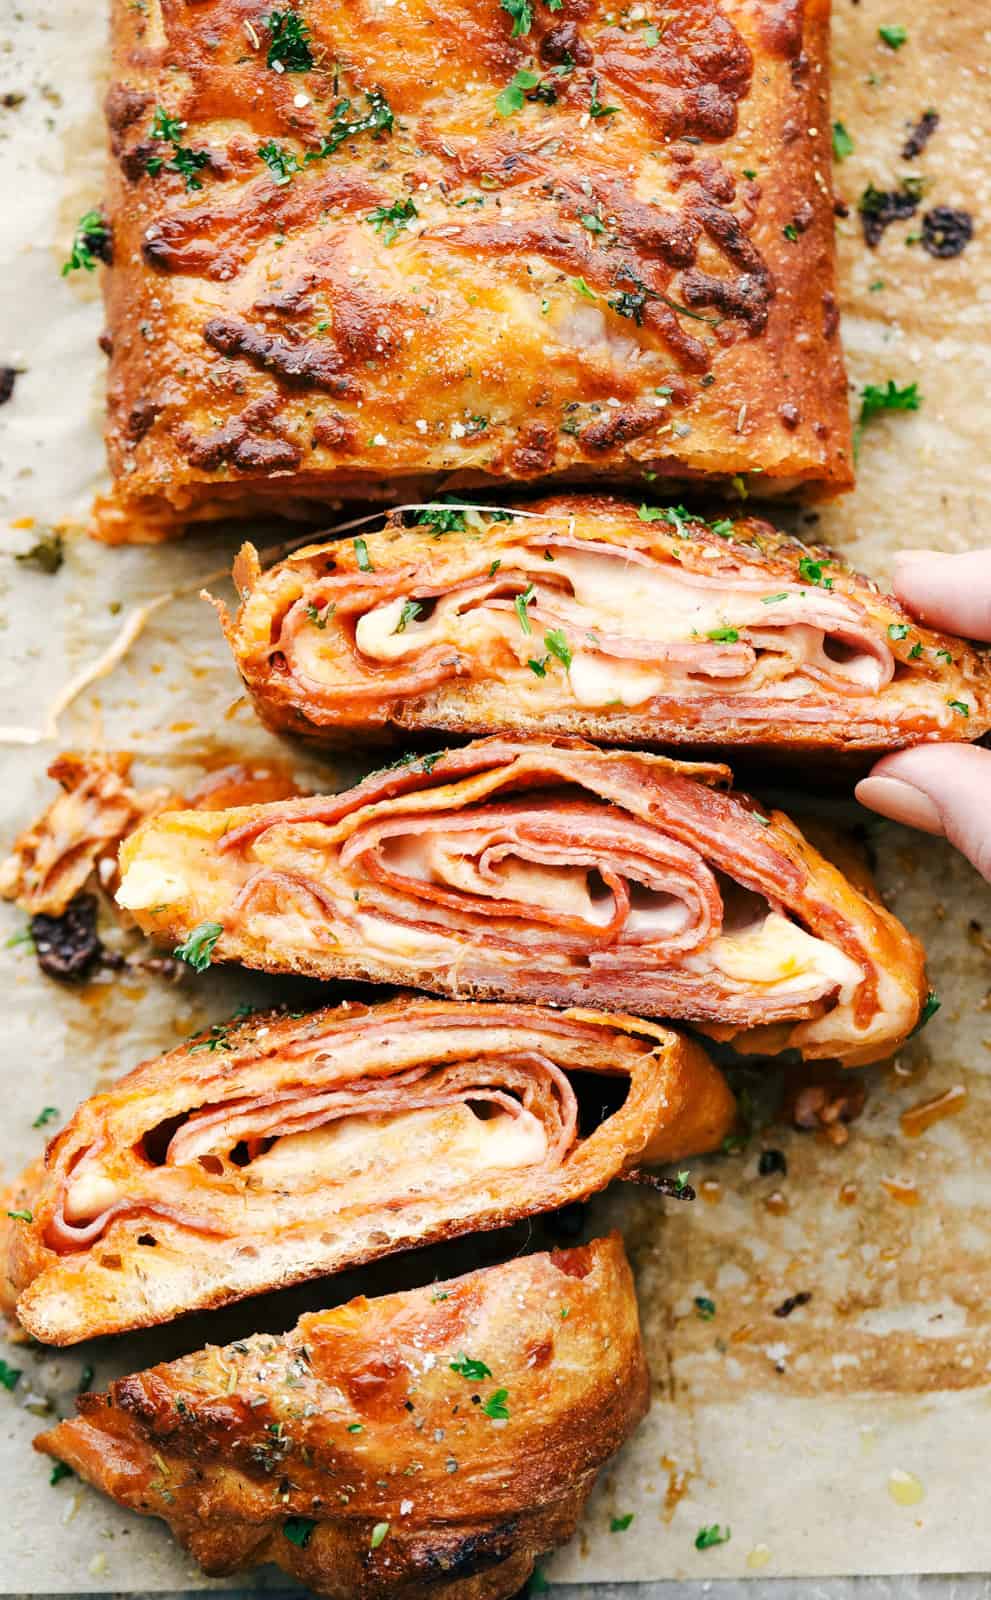 Stromboli cut into slices showing the layers of Italian meat, cheese and baked pizza dough. 